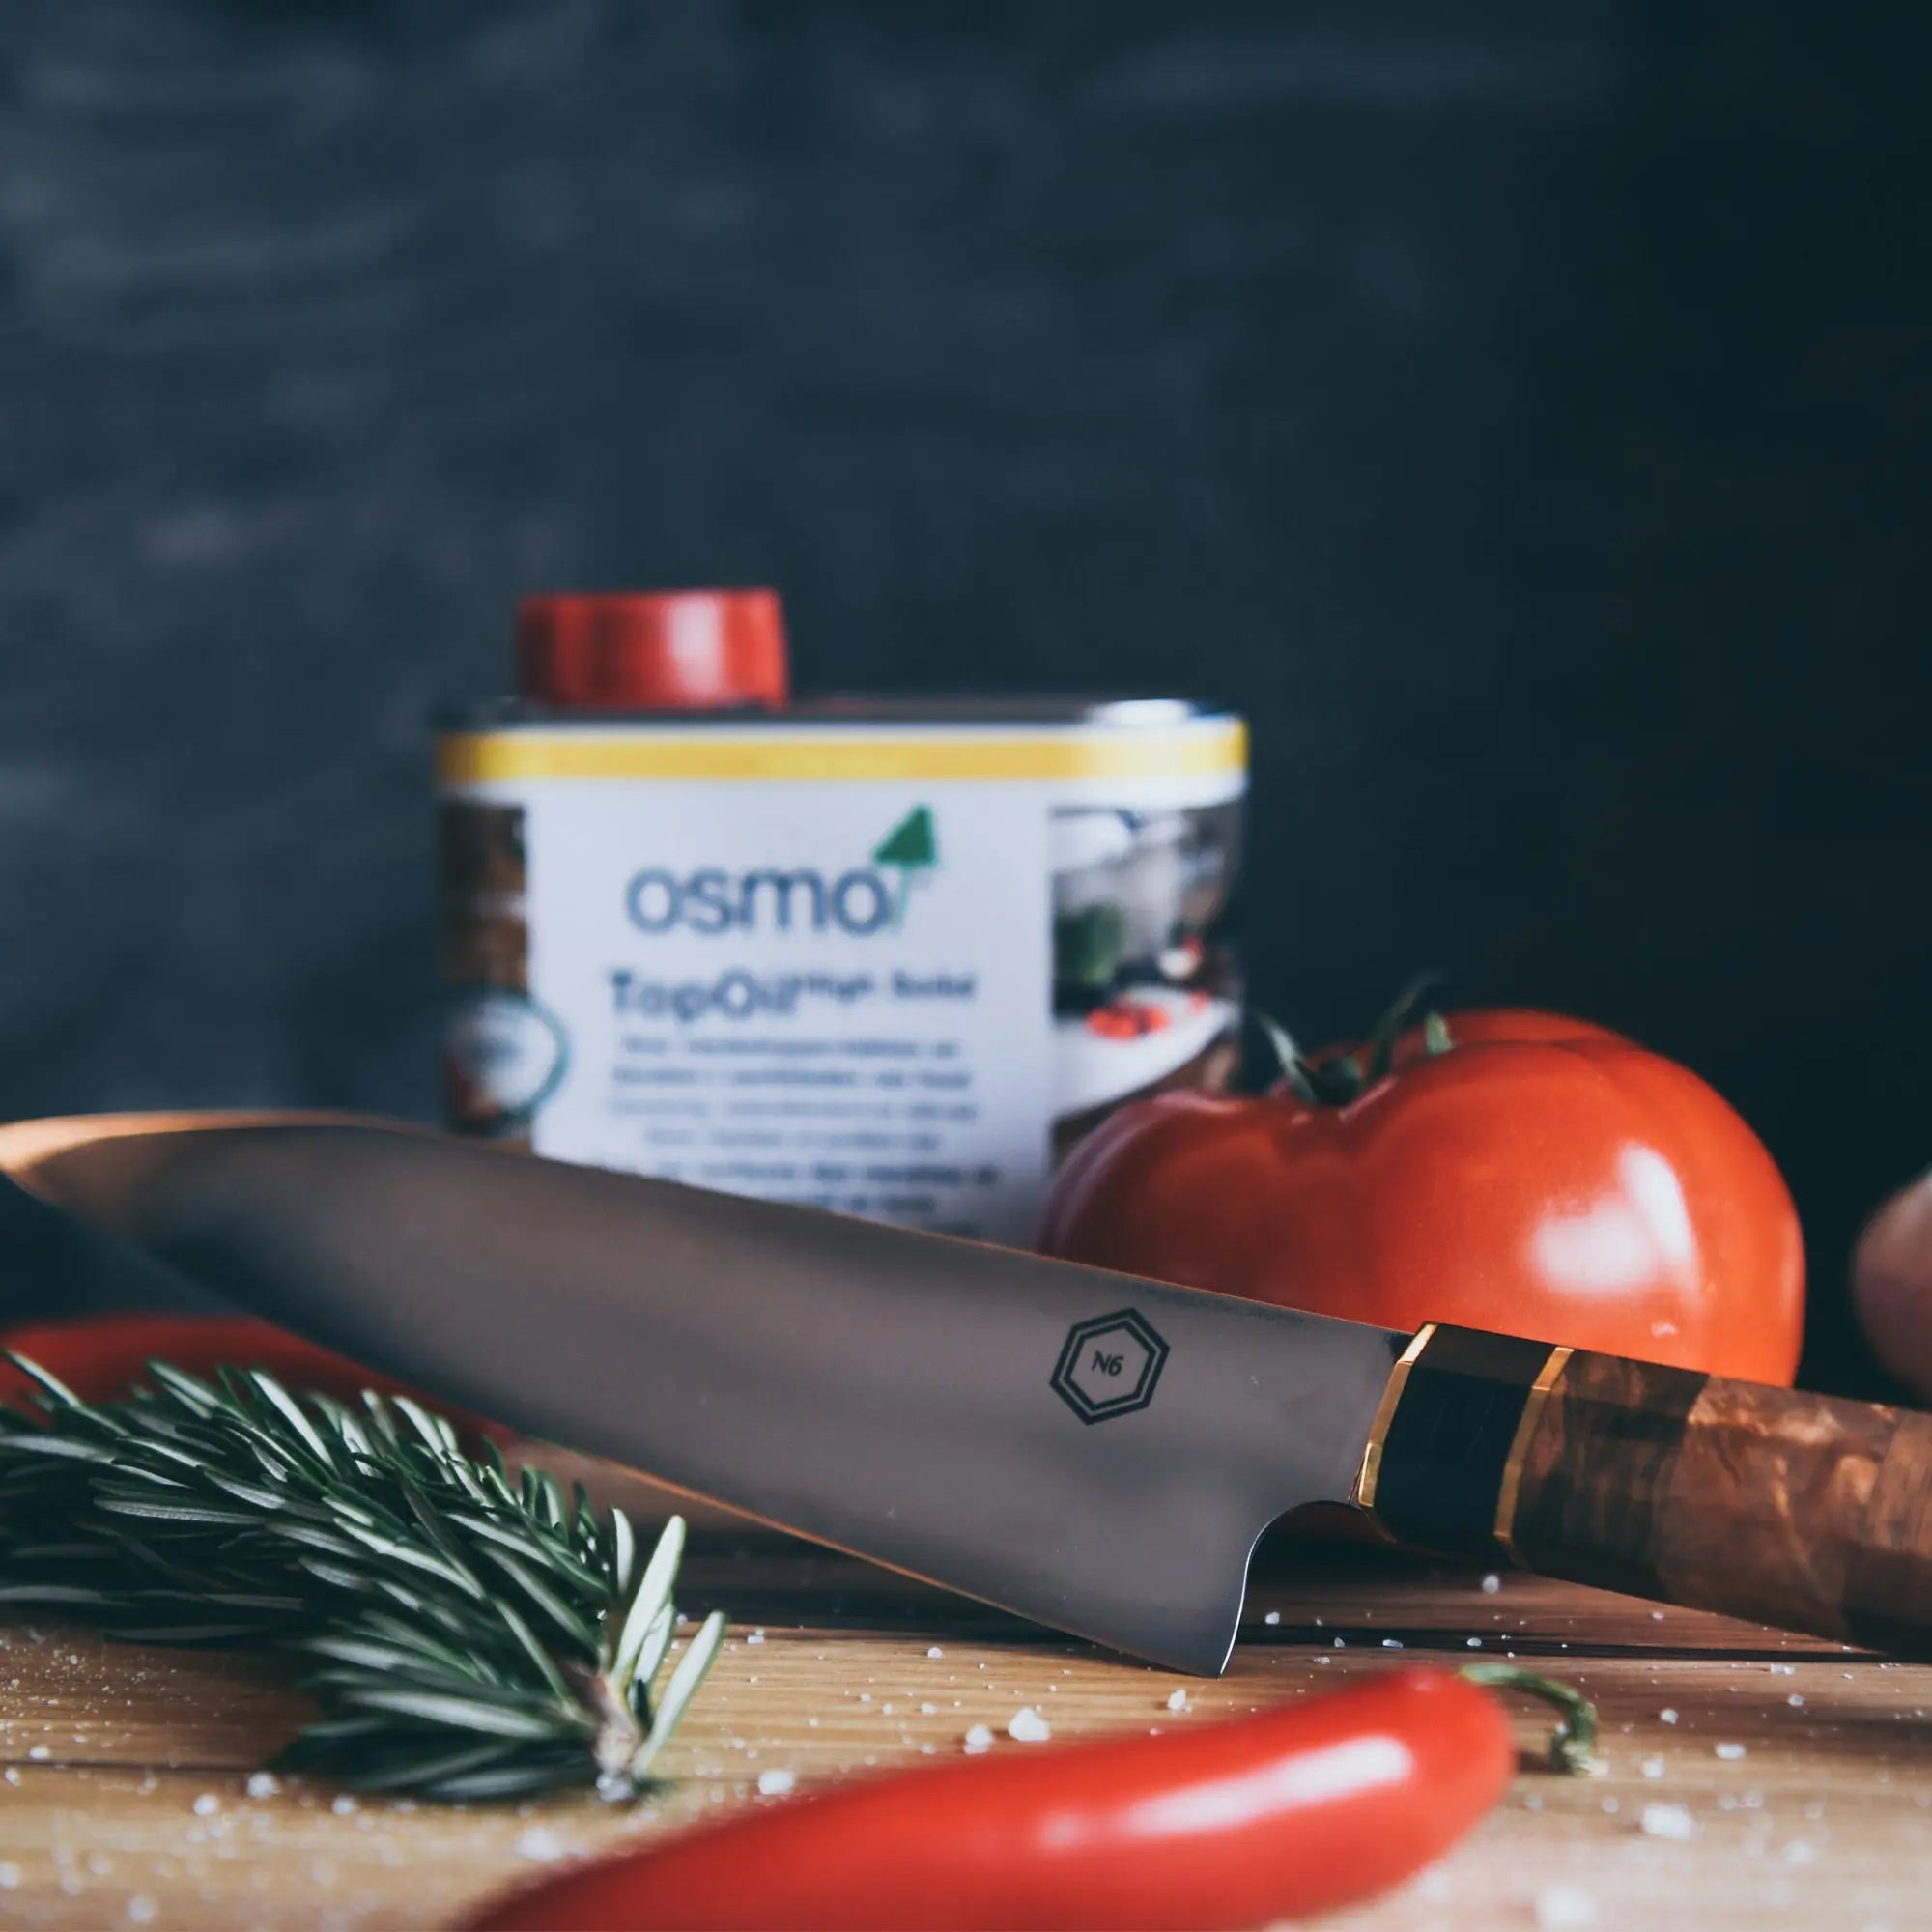 One-of-a-kind Osmo knife! - Osmo Canada Store